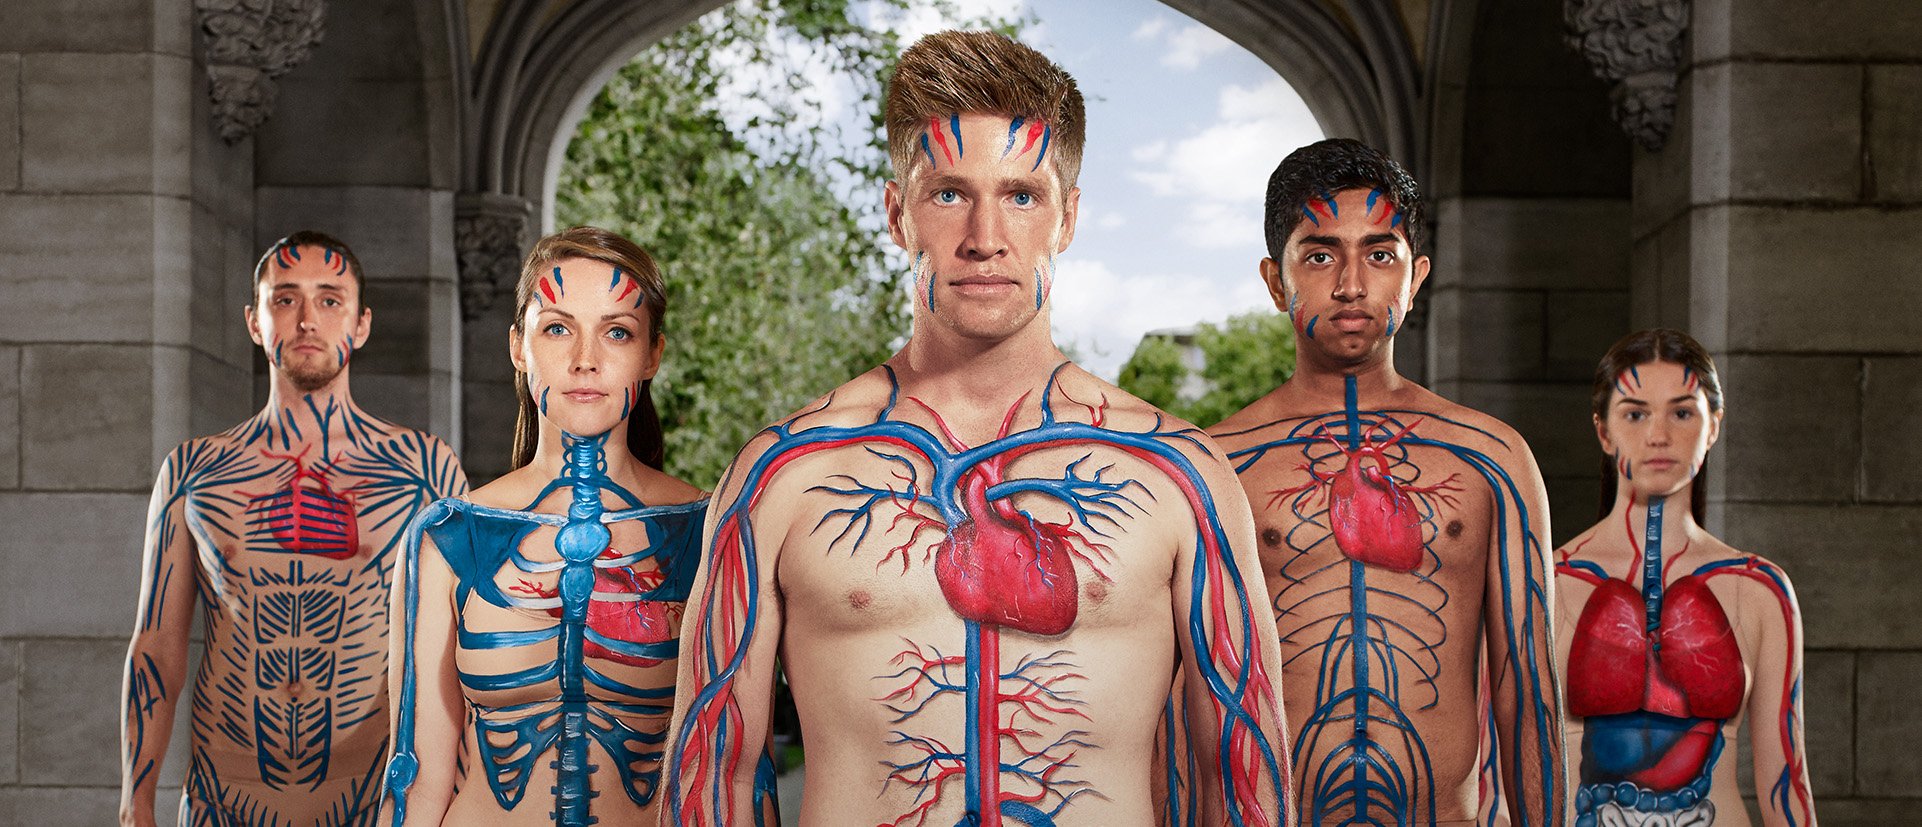 Campaign image of students with biological systems painted on their bodies..